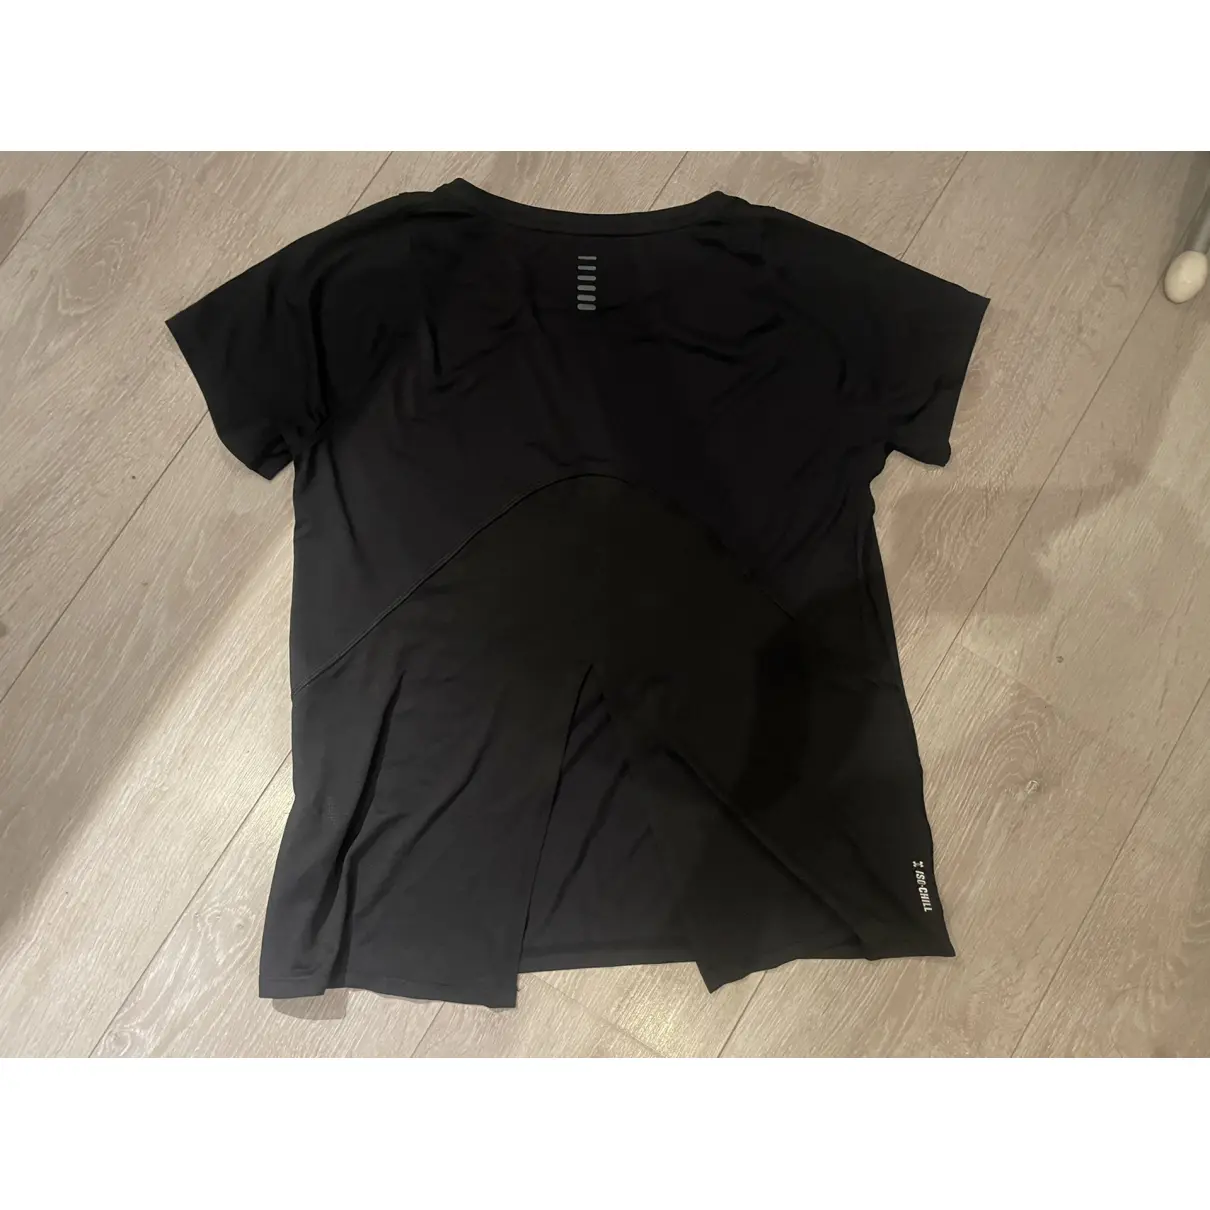 Buy Under Armour T-shirt online